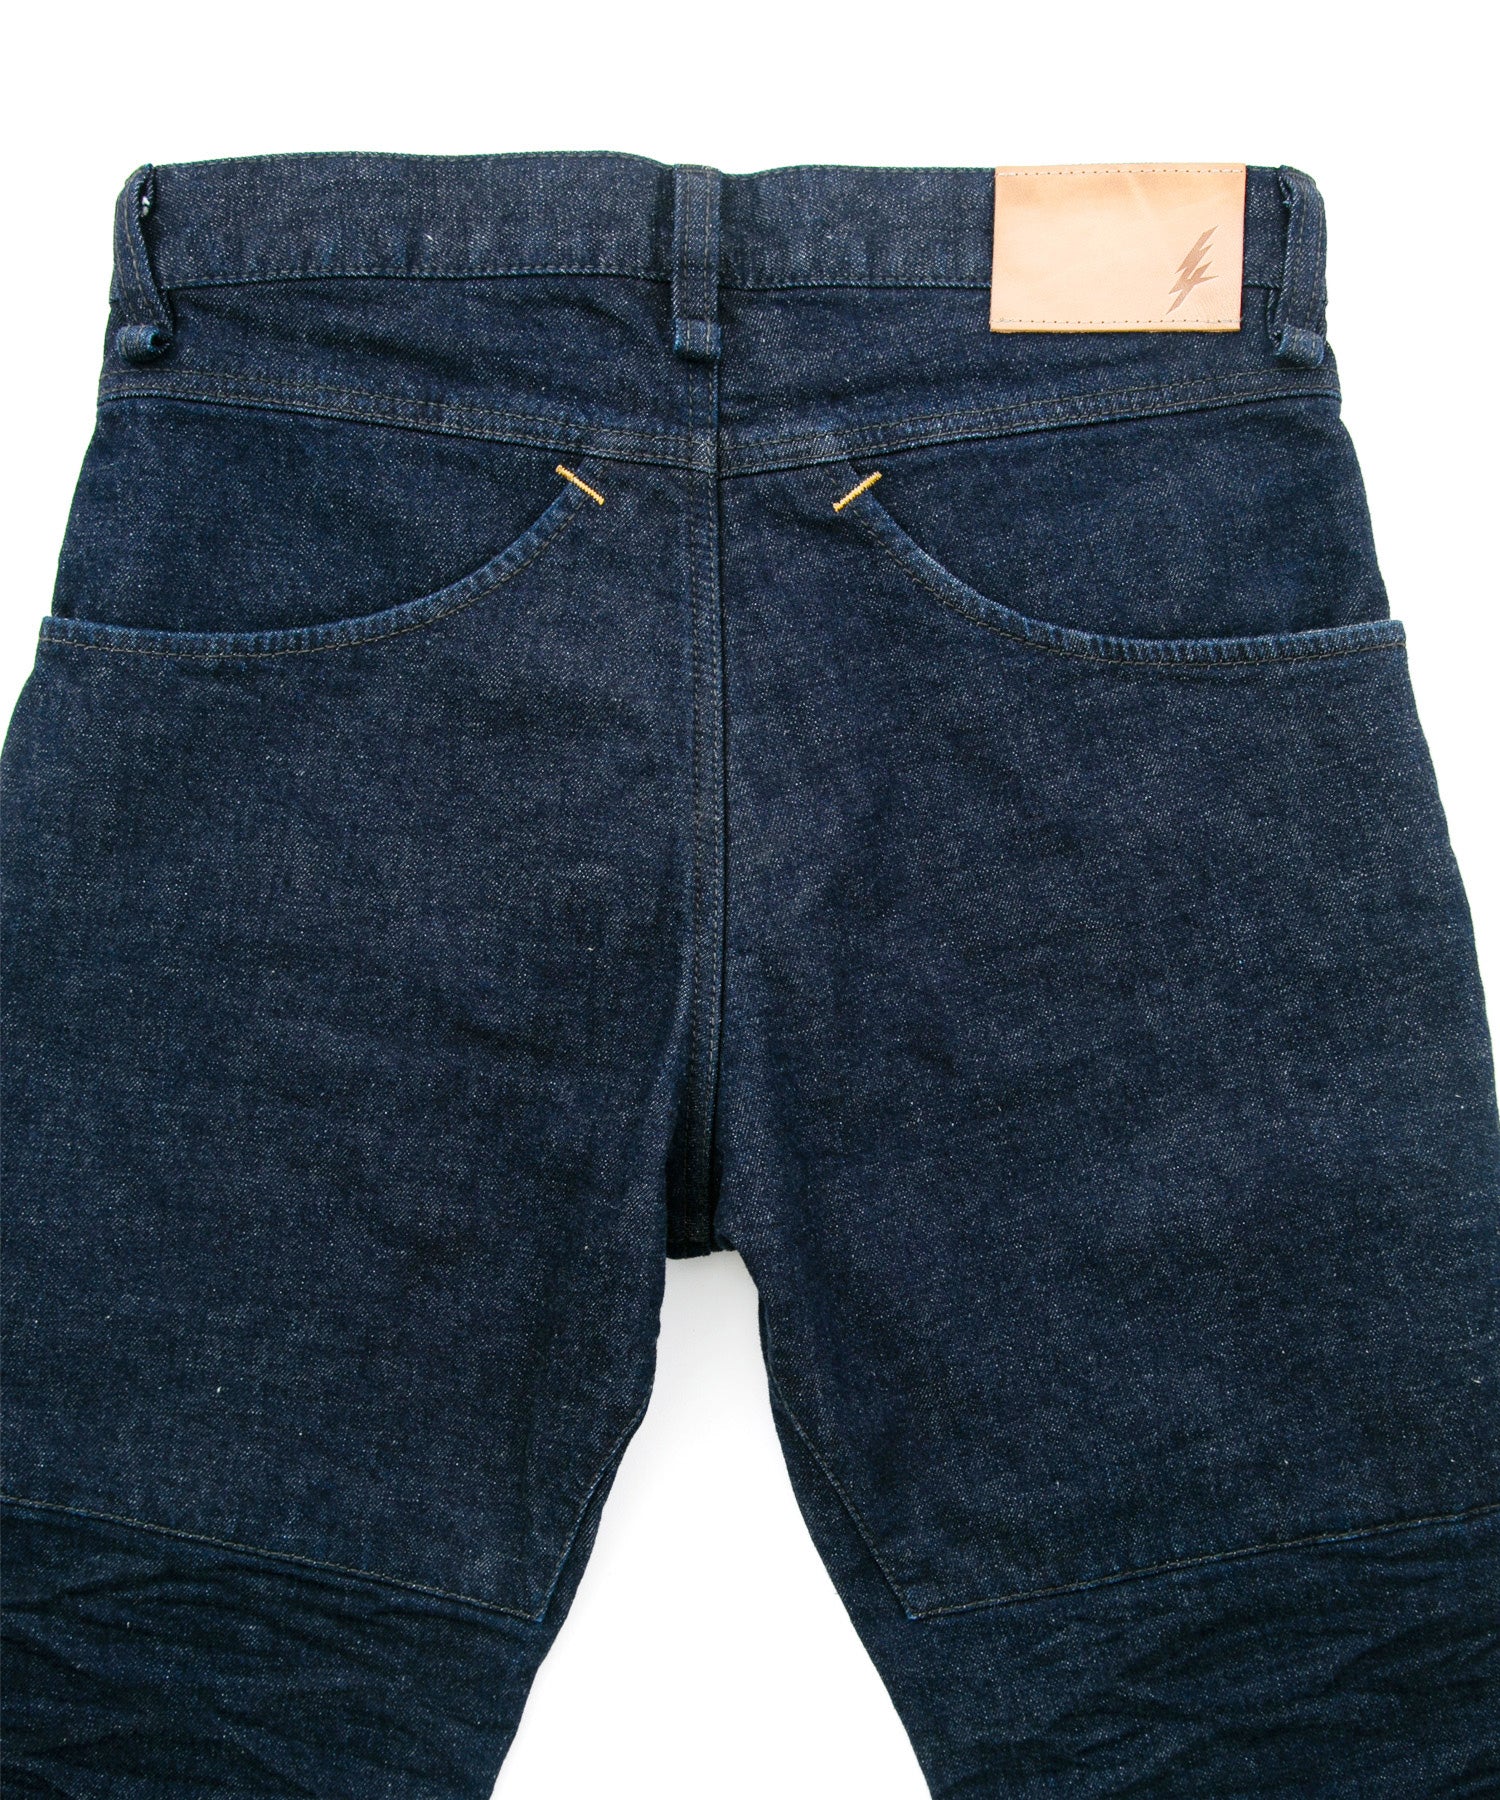 Load image into Gallery viewer, 12.5oz Organic Cotton Stretch Denim Cropped Jeans One Wash / INDIGO